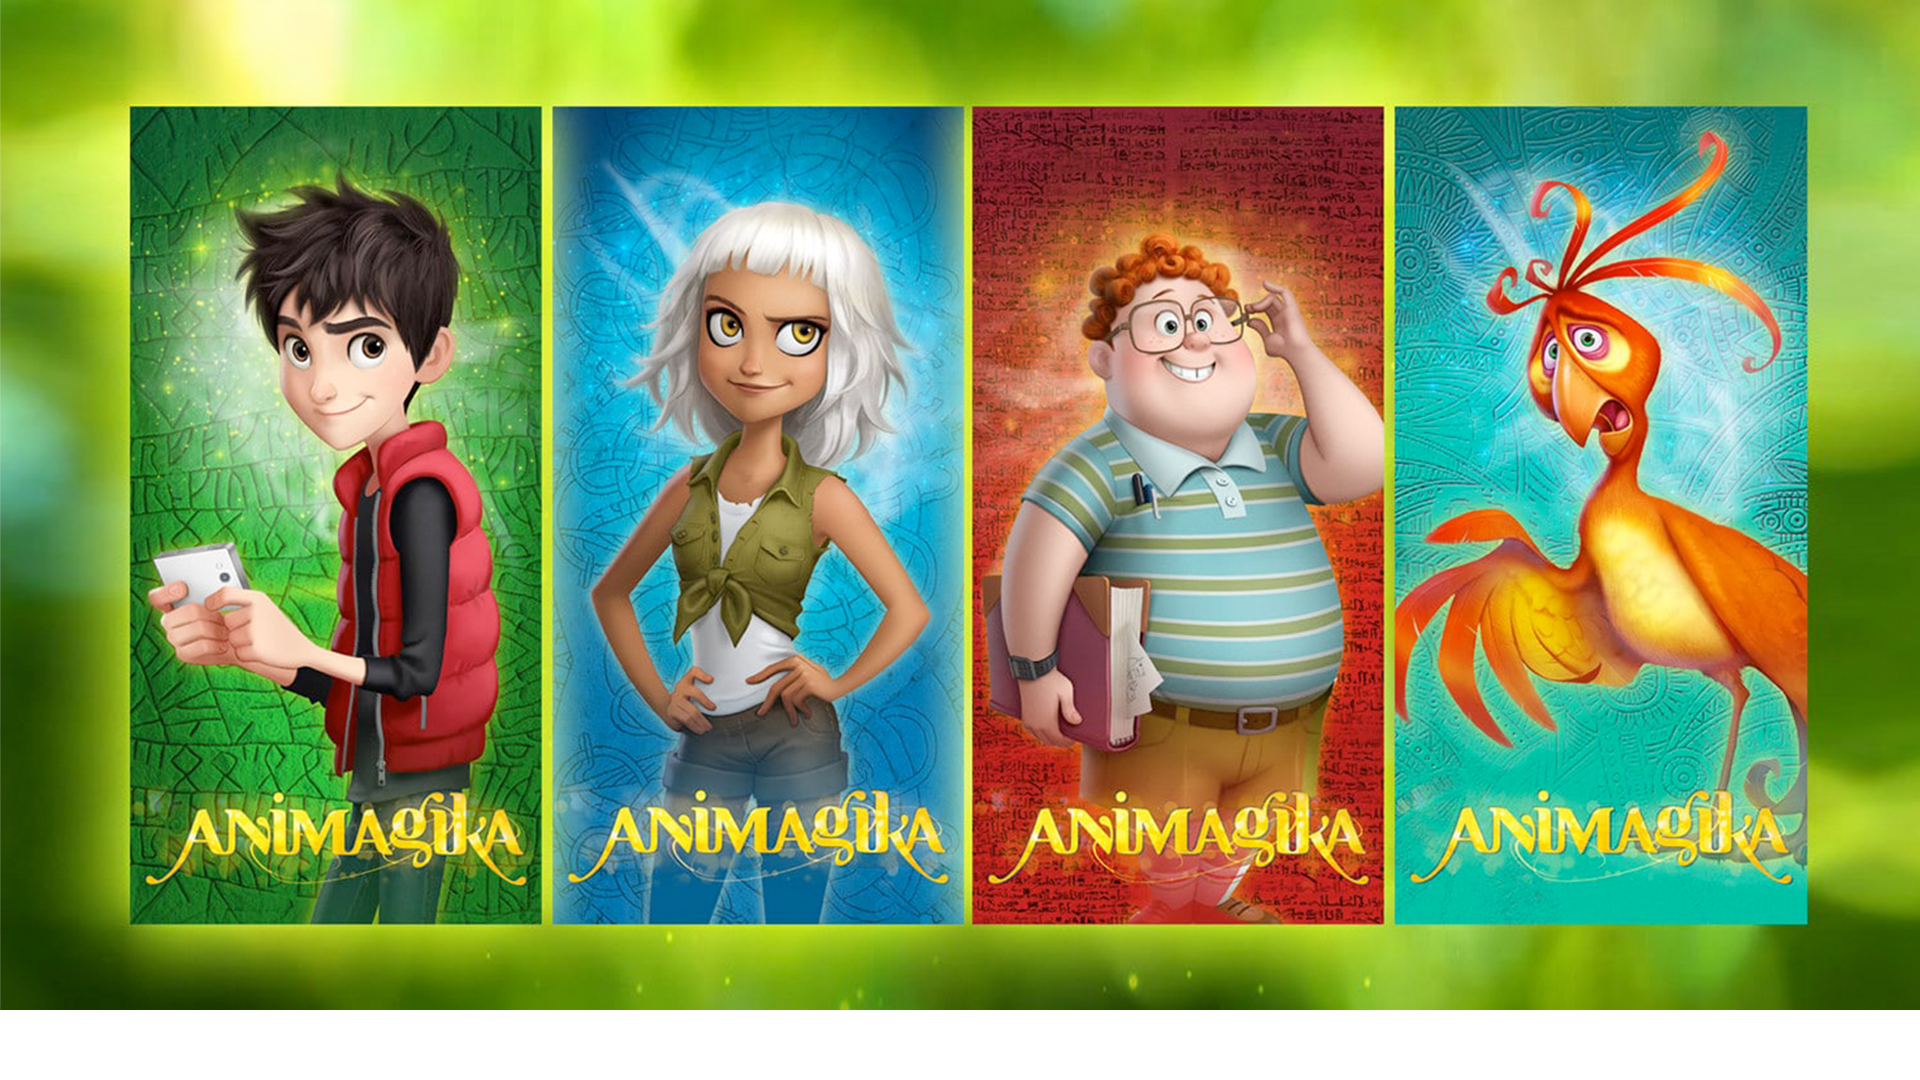 animagika galery. Antaruxa has worked on this animation project